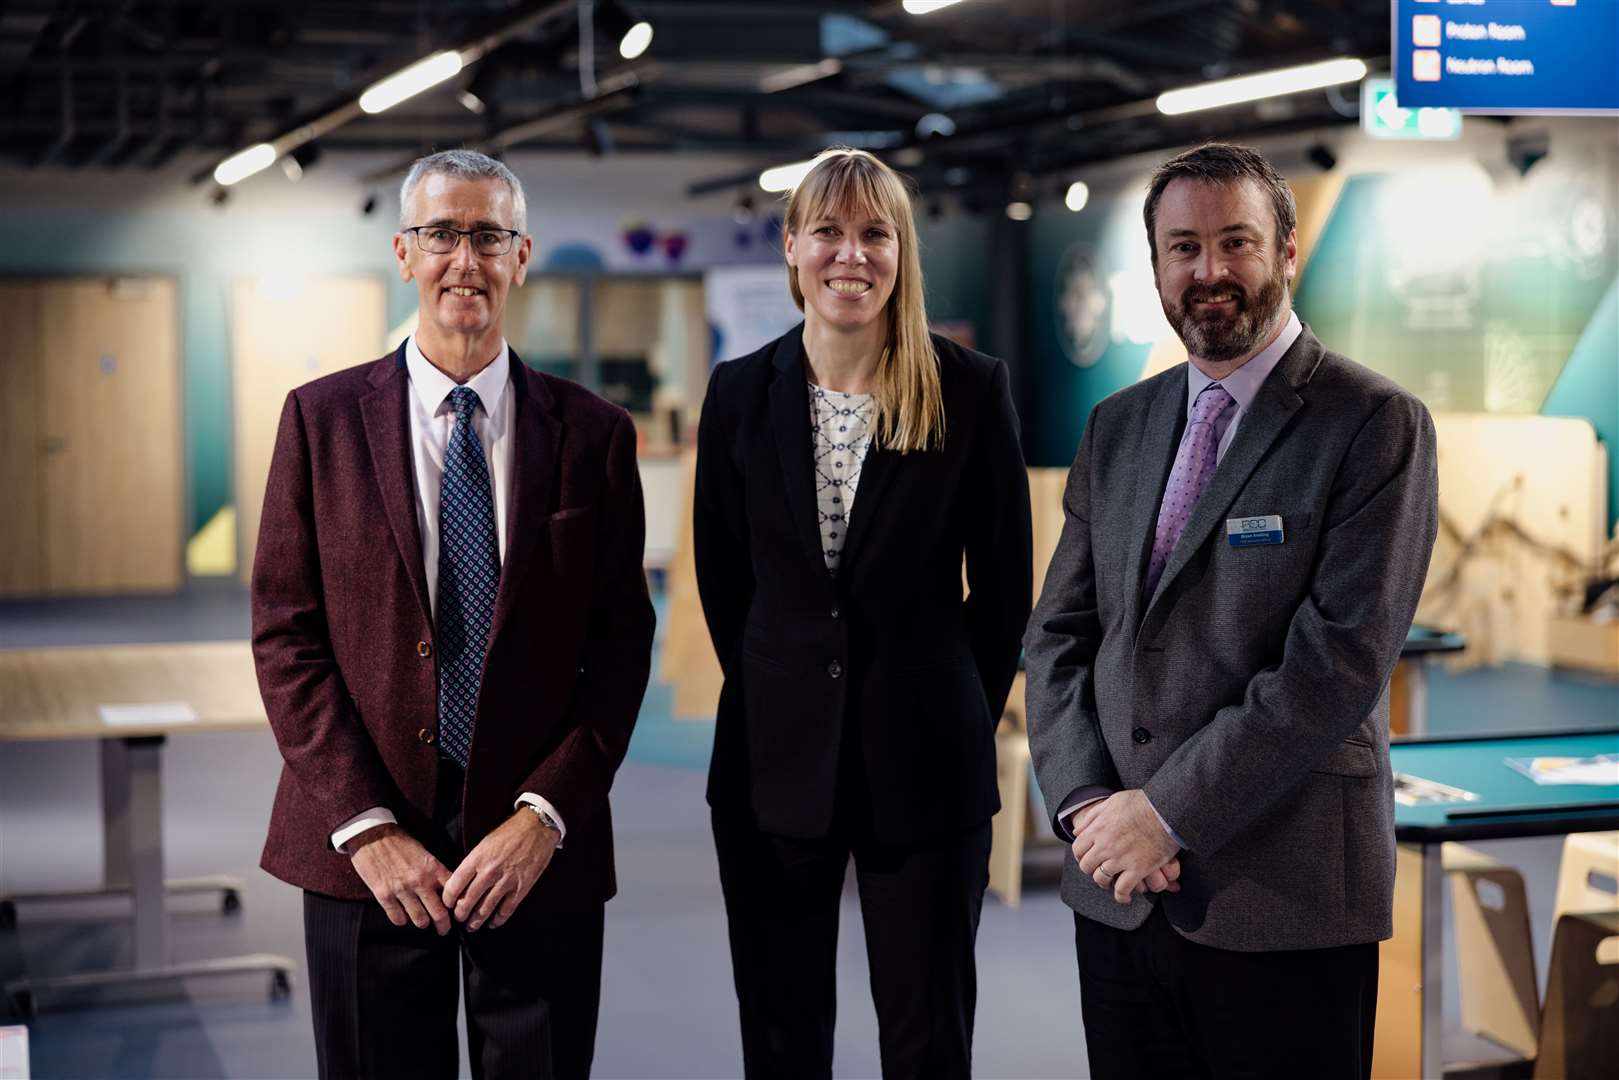 (From left) Sandy Morton, chair of the board of trustees at Aberdeen Science Centre, Professor Catherine Heymans, Astronomer Royal for Scotland and Bryan Snelling, chief executive of Aberdeen Science Centre.